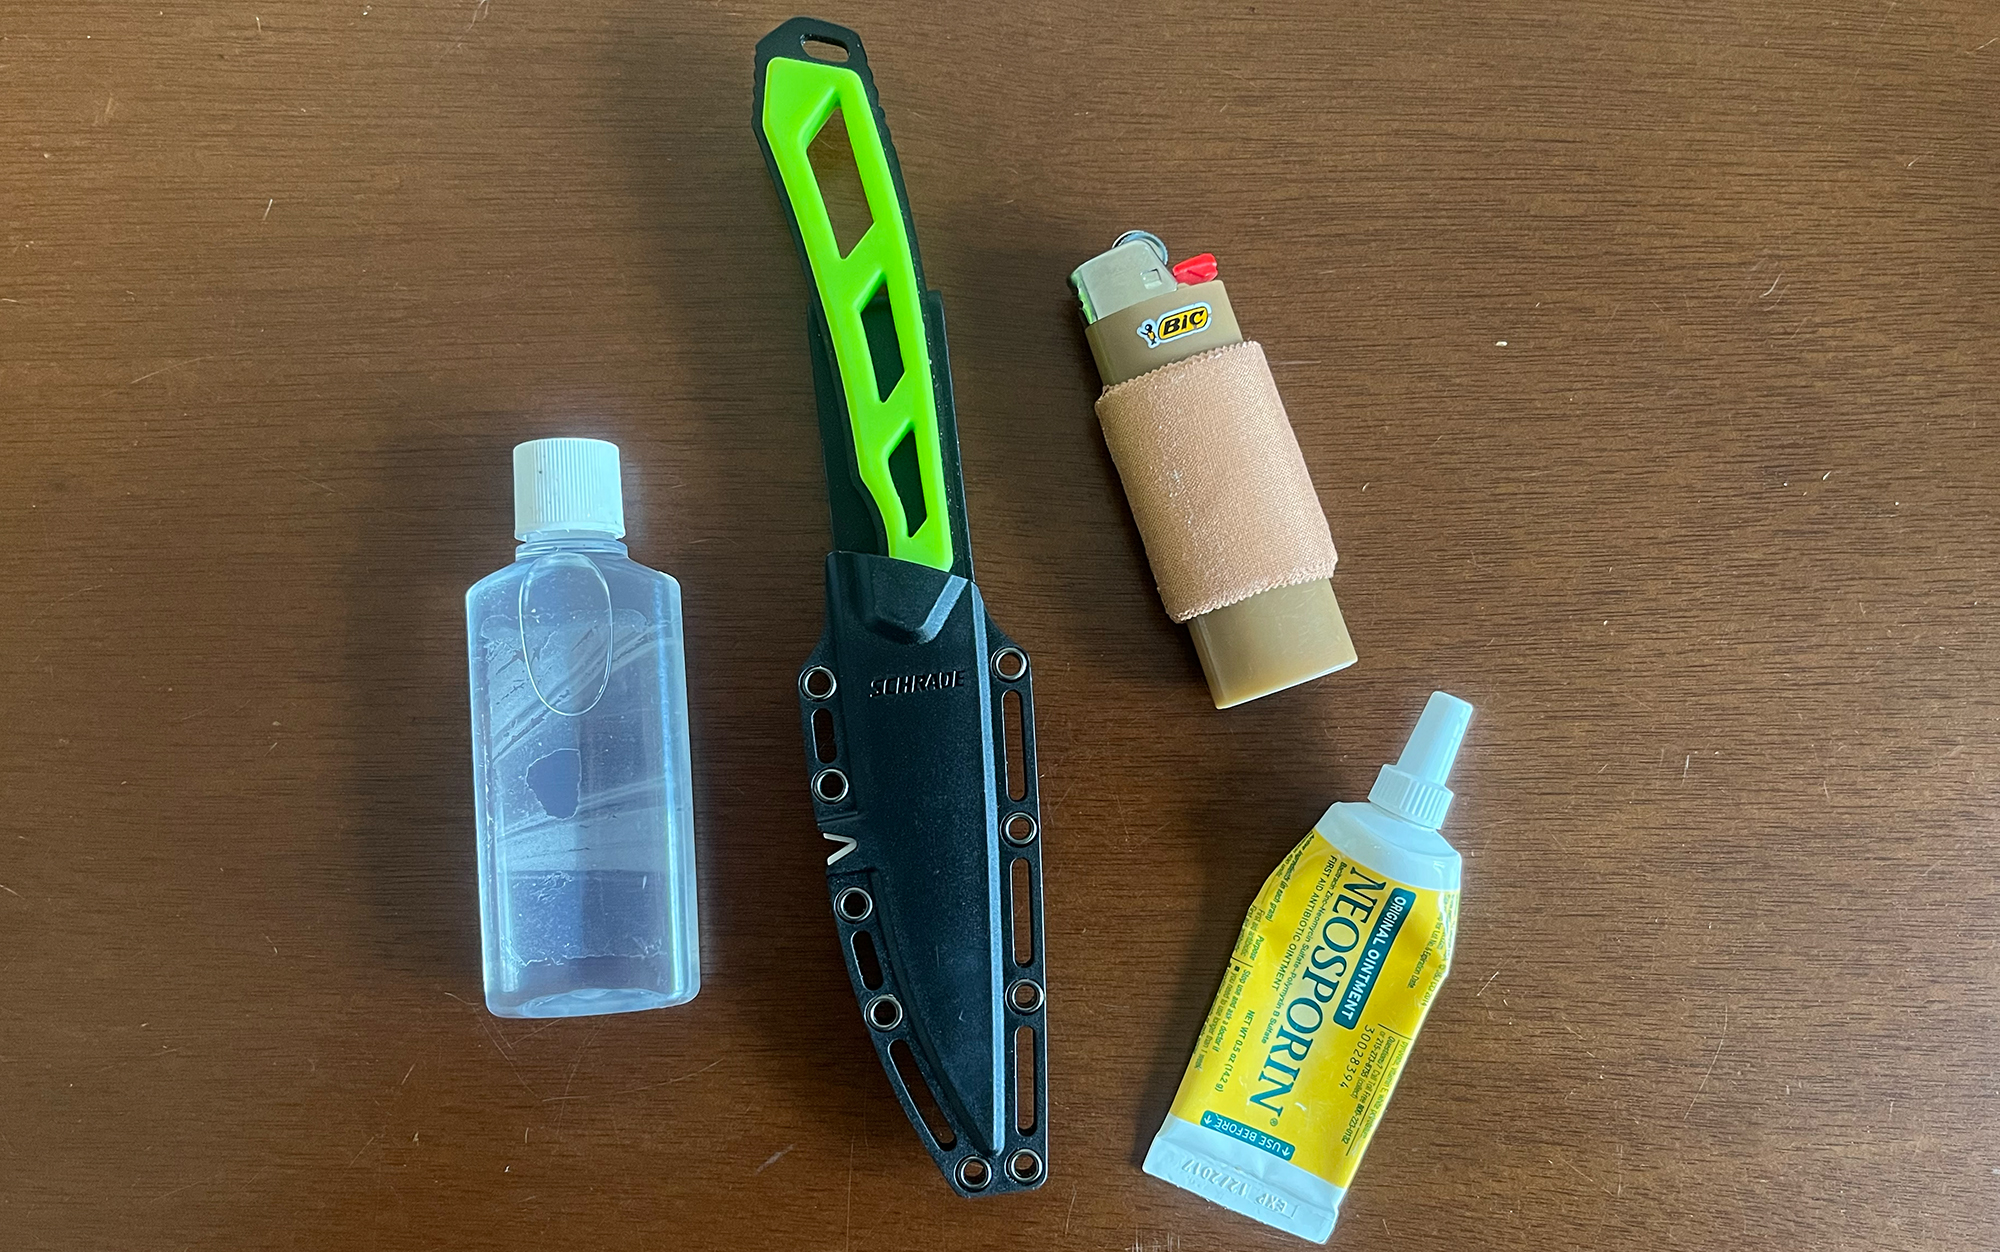 My blister kit includes a knife, rubbing alcohol, Leukotape, and Neosporin.